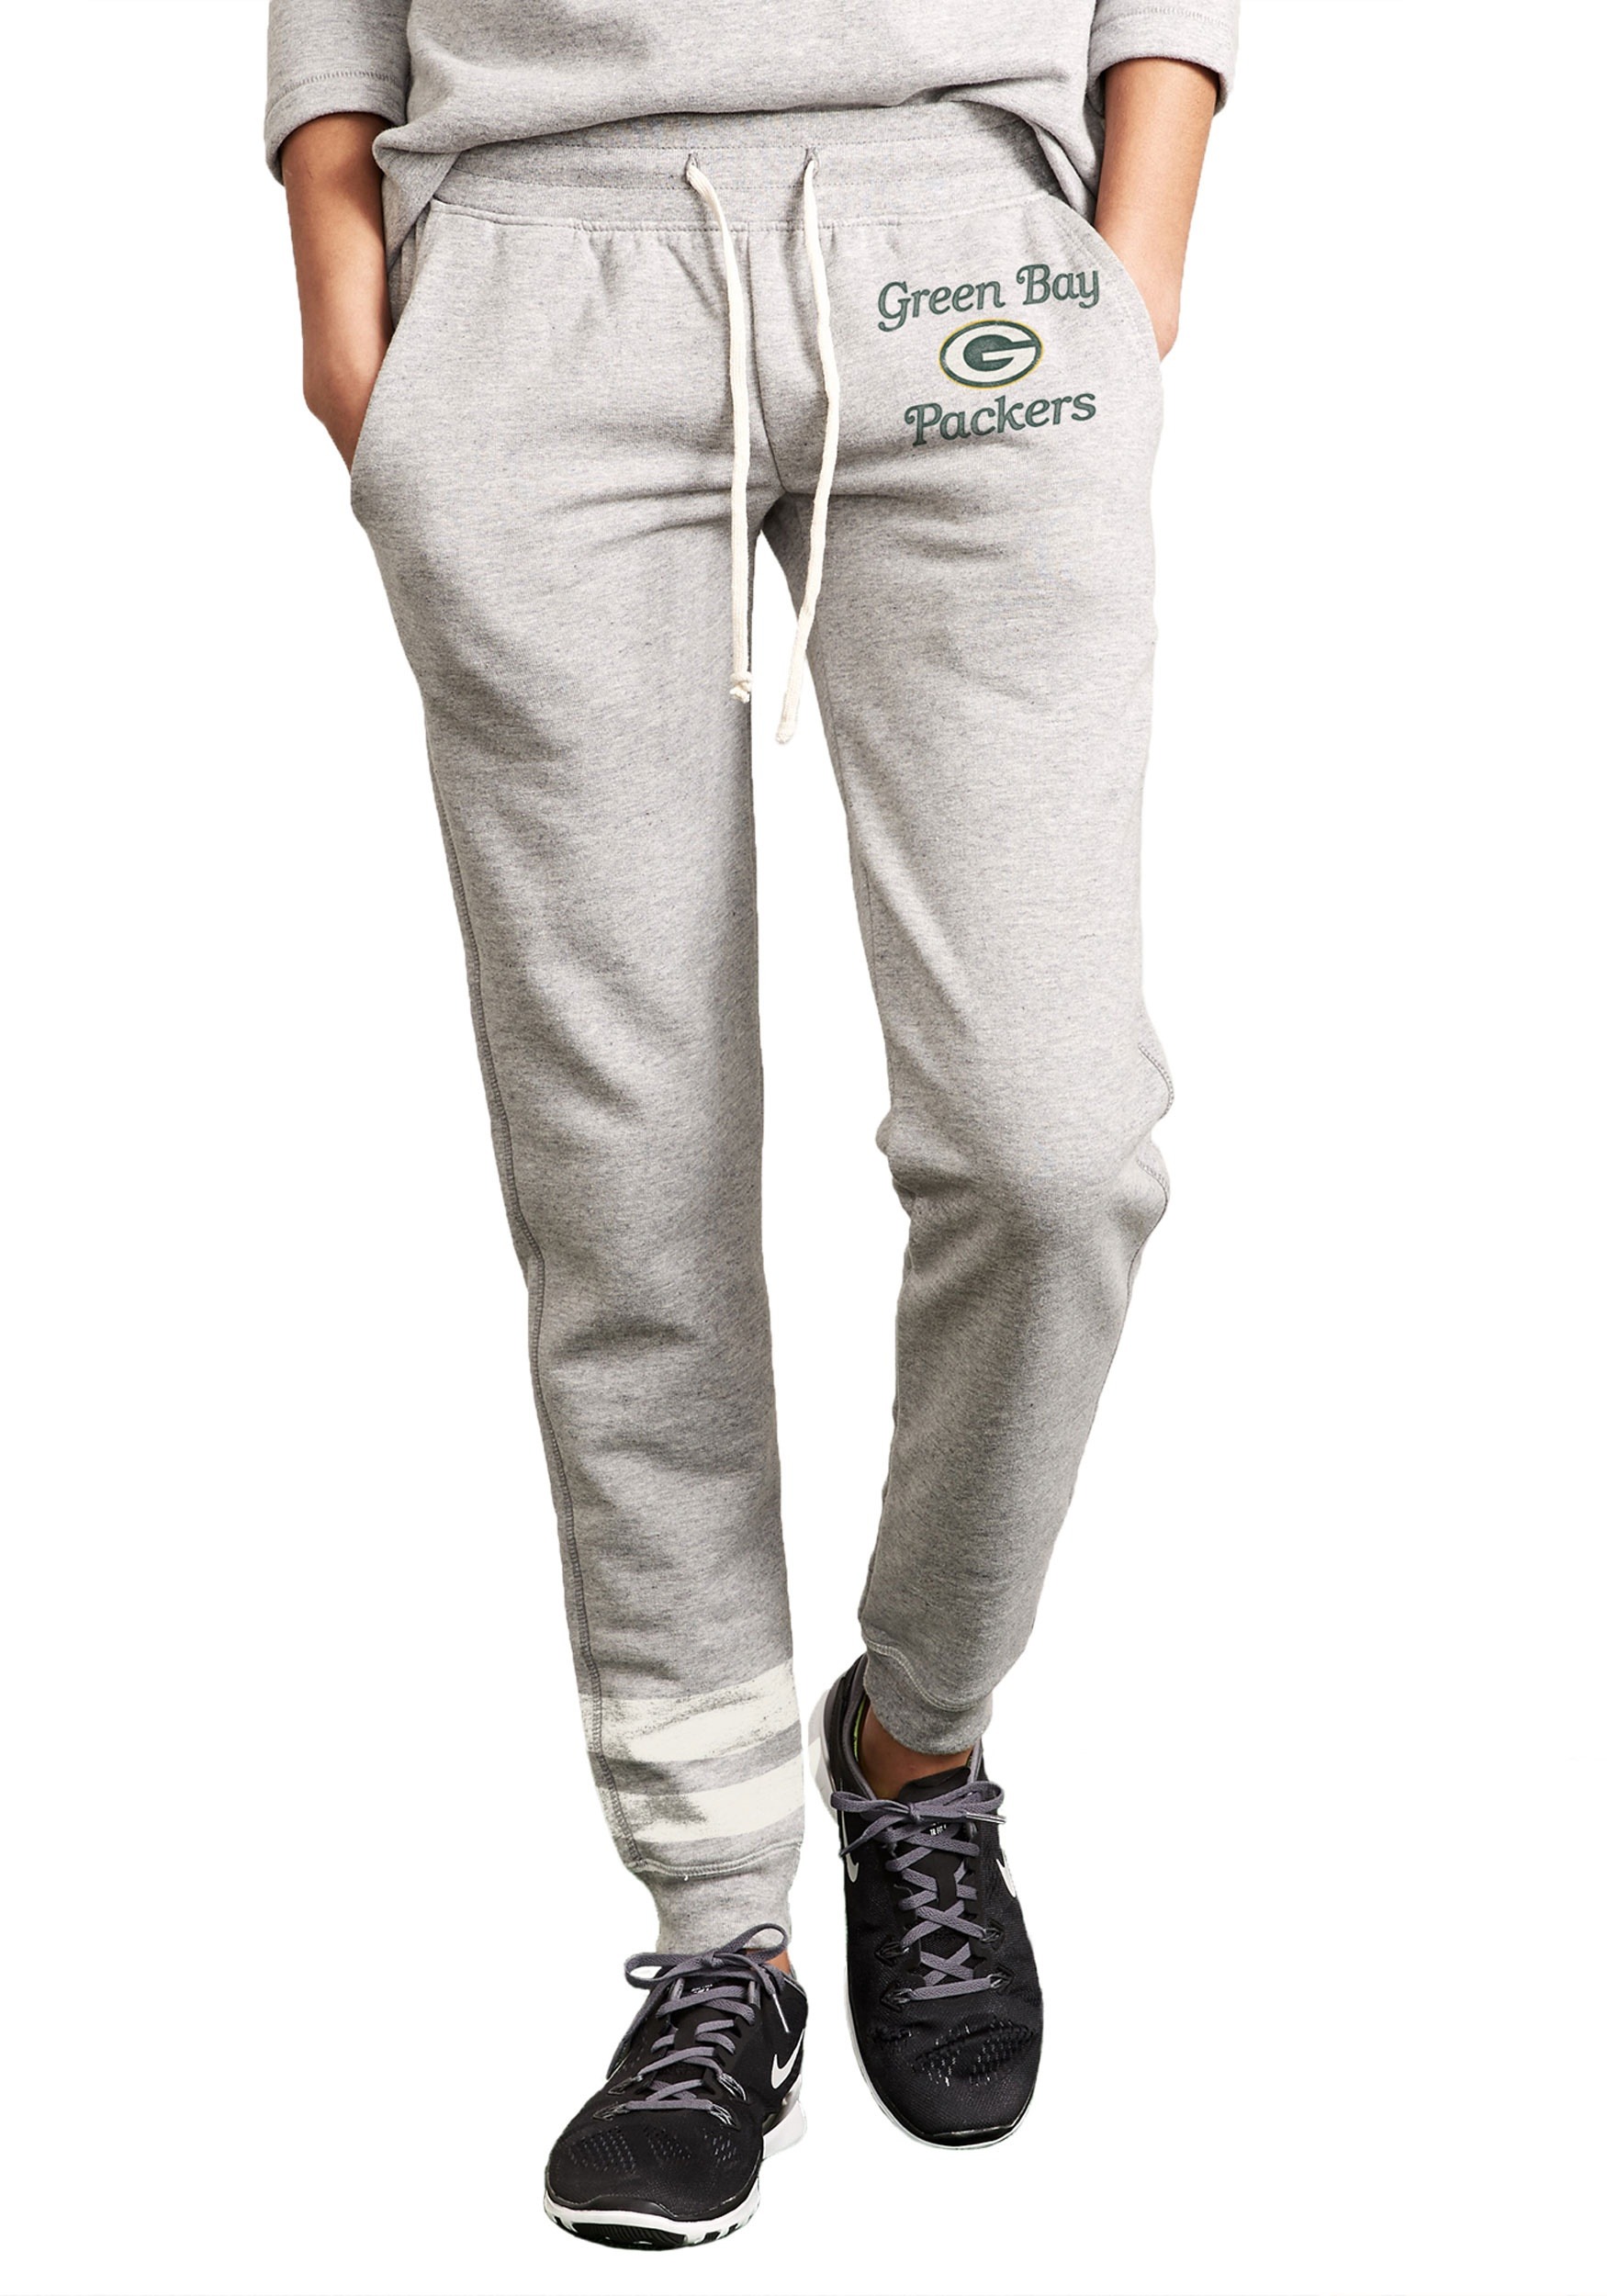 Green Bay Packers Sunday Sweat Pants for Women